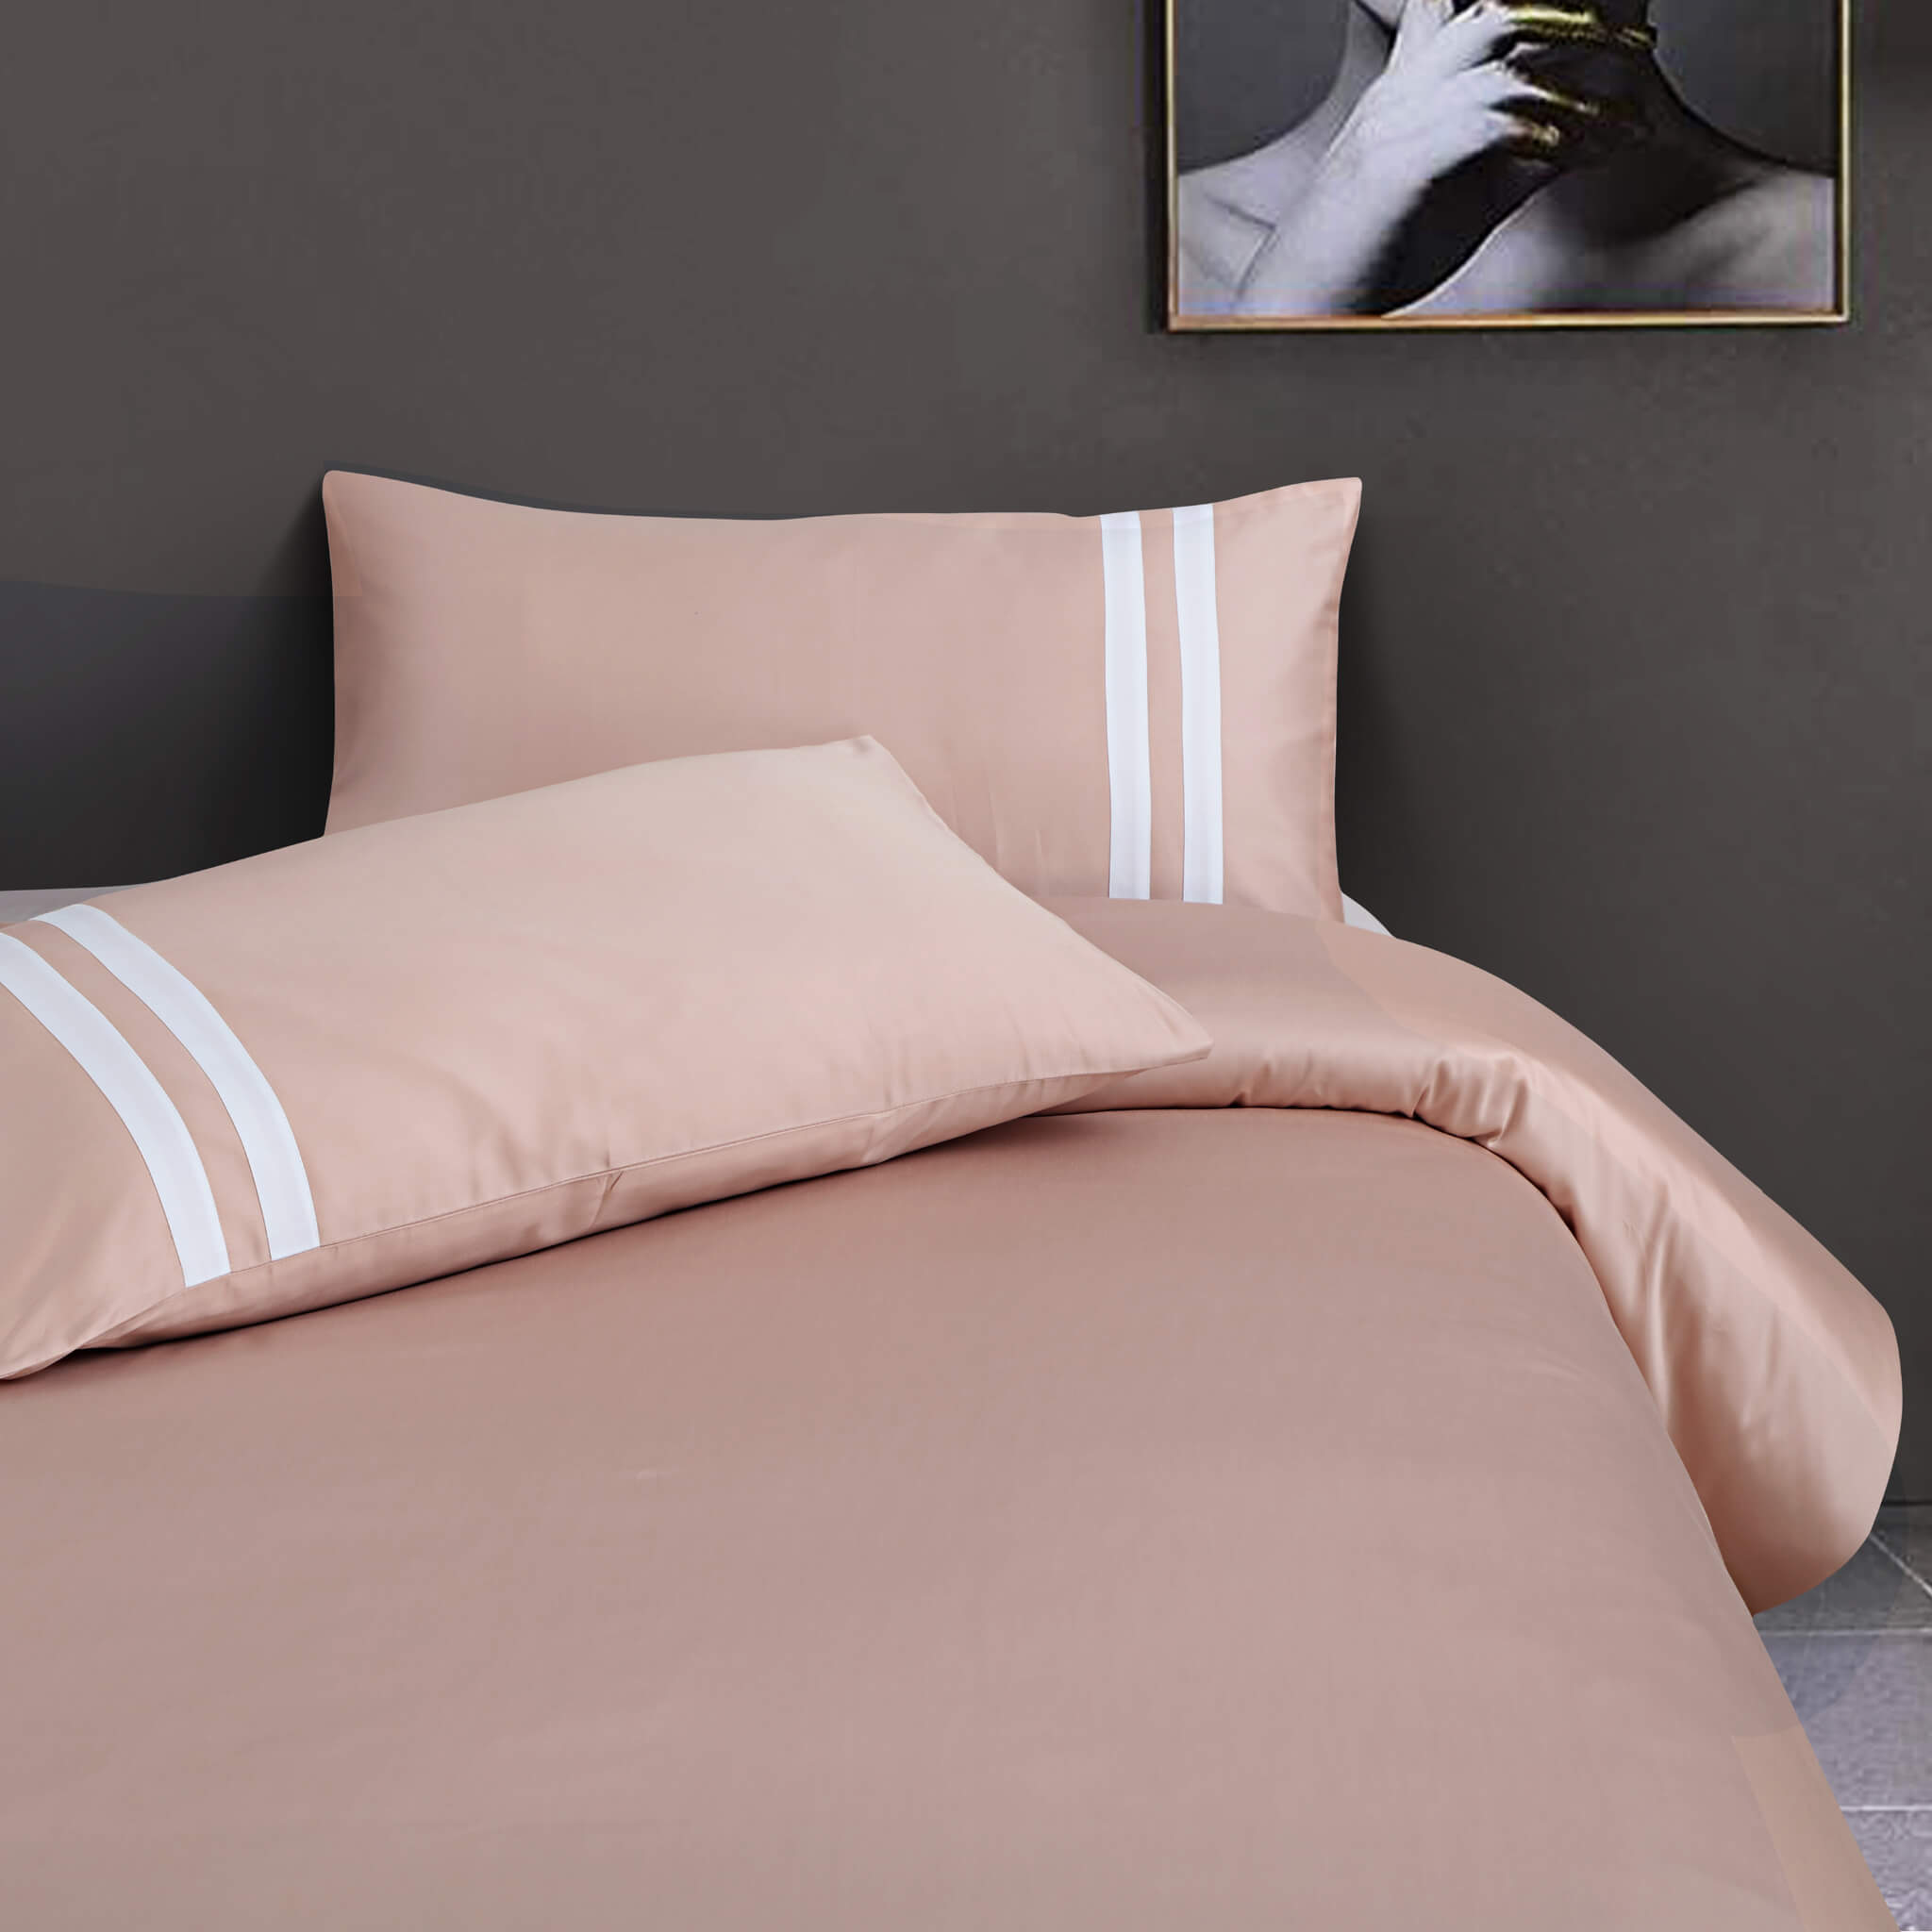 Malako Vivid Striped Solid Rose Beige 500 TC King Size 100% Cotton Bed Sheet With 2 Plain Pillow Covers with Stripes - MALAKO